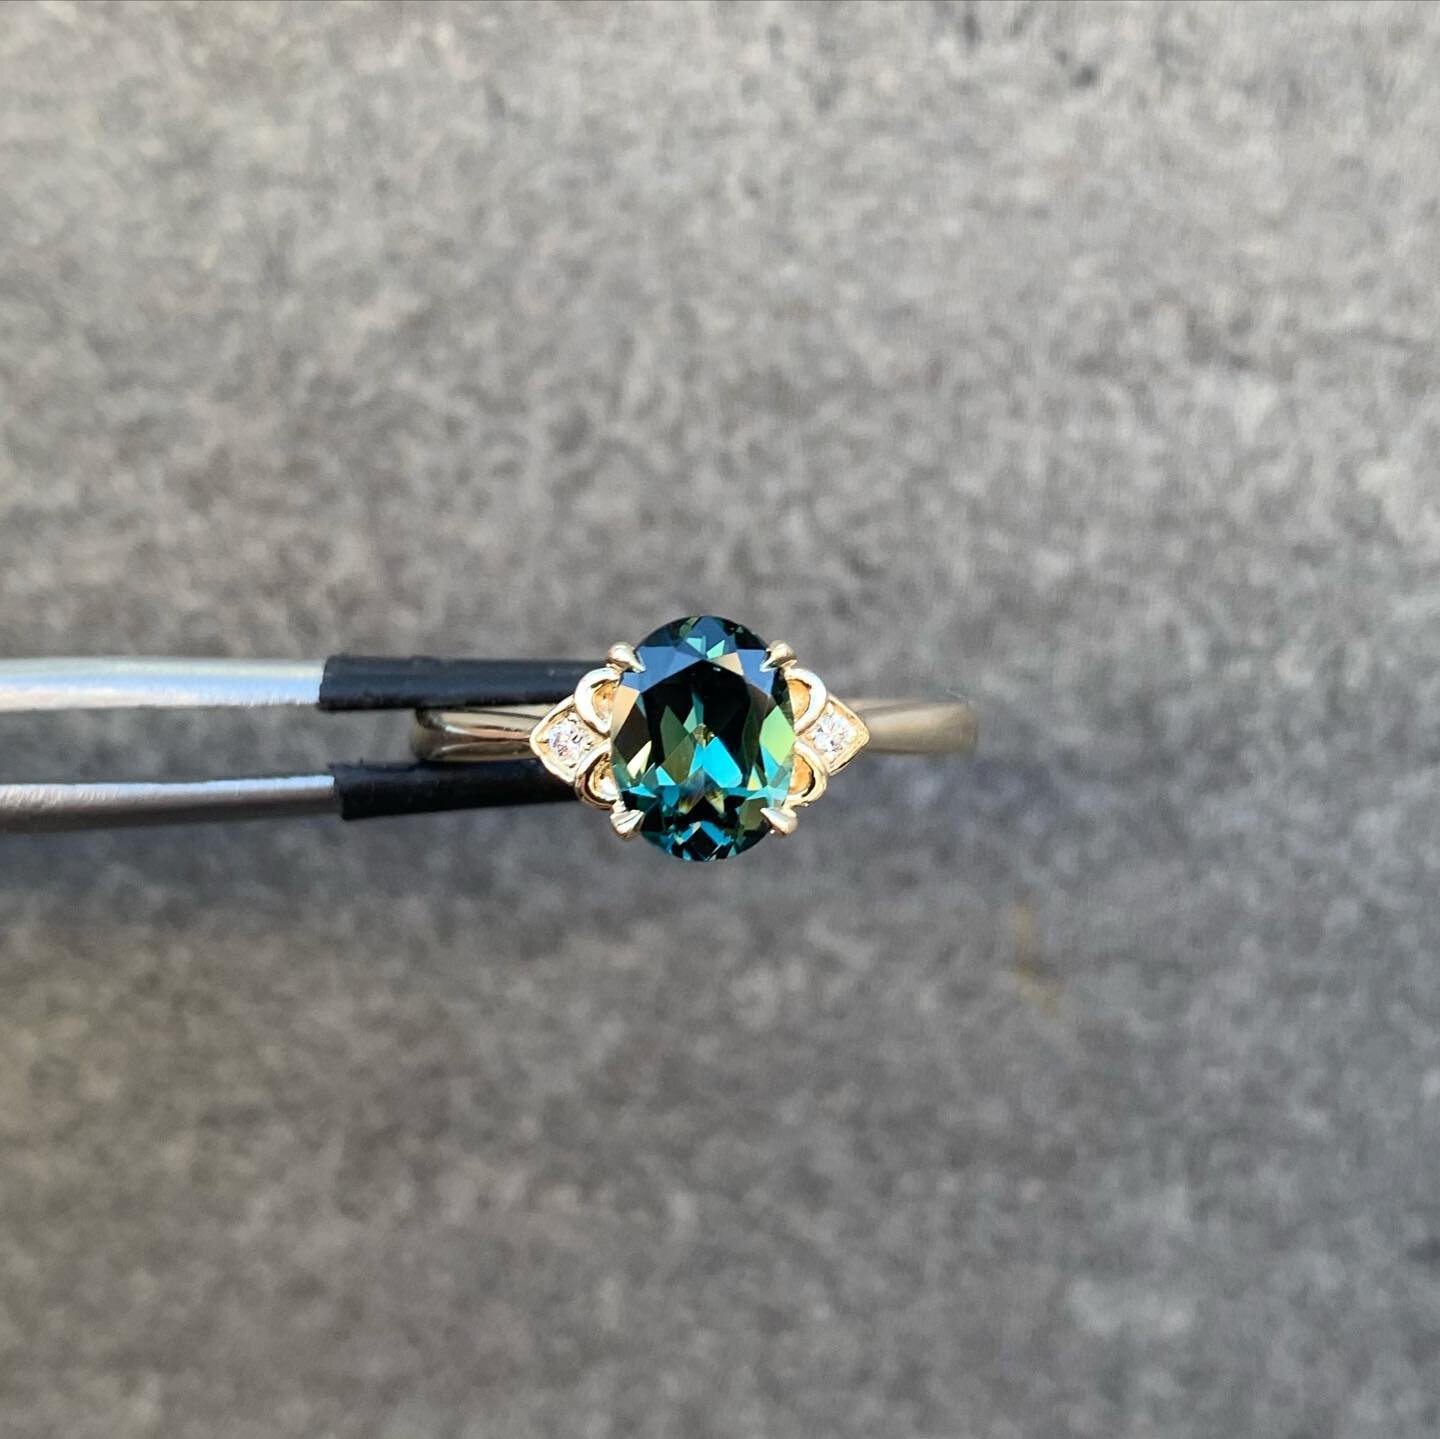 Handcrafted Greenish Blue Sapphire as an alternative engagement ring. 
Swipe ➡️ to see the details. 
#unfiltered
&mdash;
🧞&zwj;♂️: @magnoliajewelers
&mdash;
𝐝𝐫𝐞𝐚𝐦 𝐢𝐭. 𝐰𝐞'𝐥𝐥 𝐦𝐚𝐤𝐞 𝐢𝐭.
&mdash;
#handcraft #handcrafted #dreamring #ring #